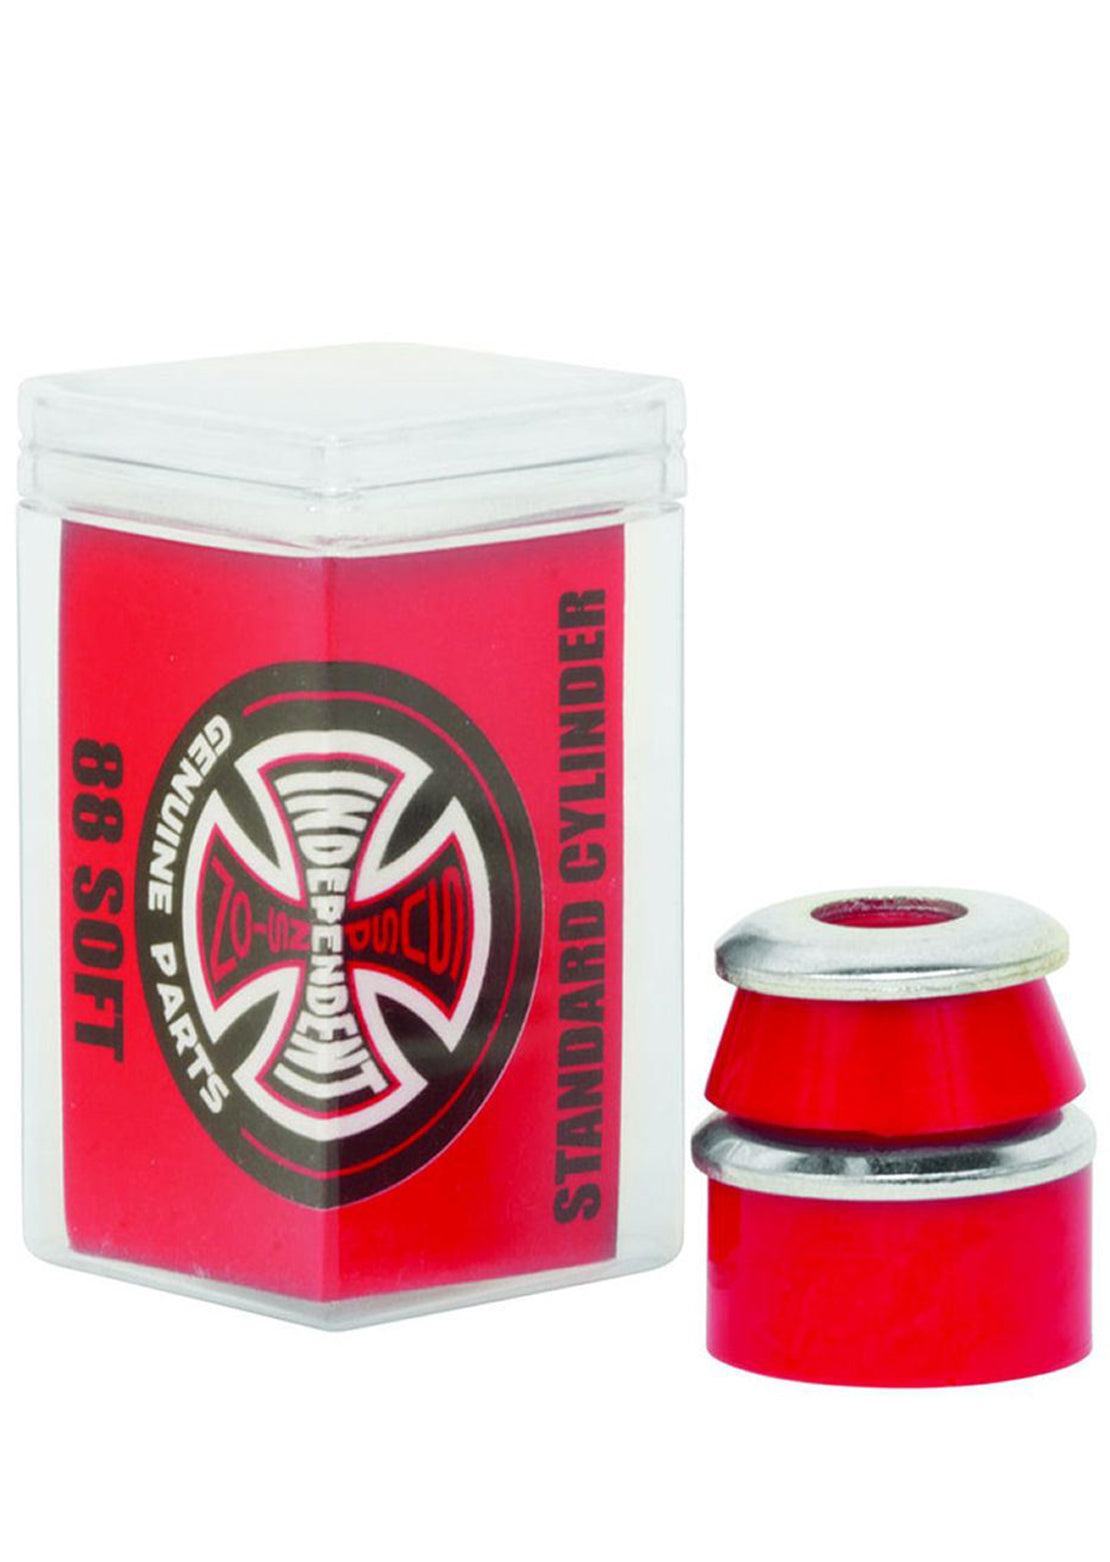 Independent Standard Bushings Red - Cylinder - Soft - 88a